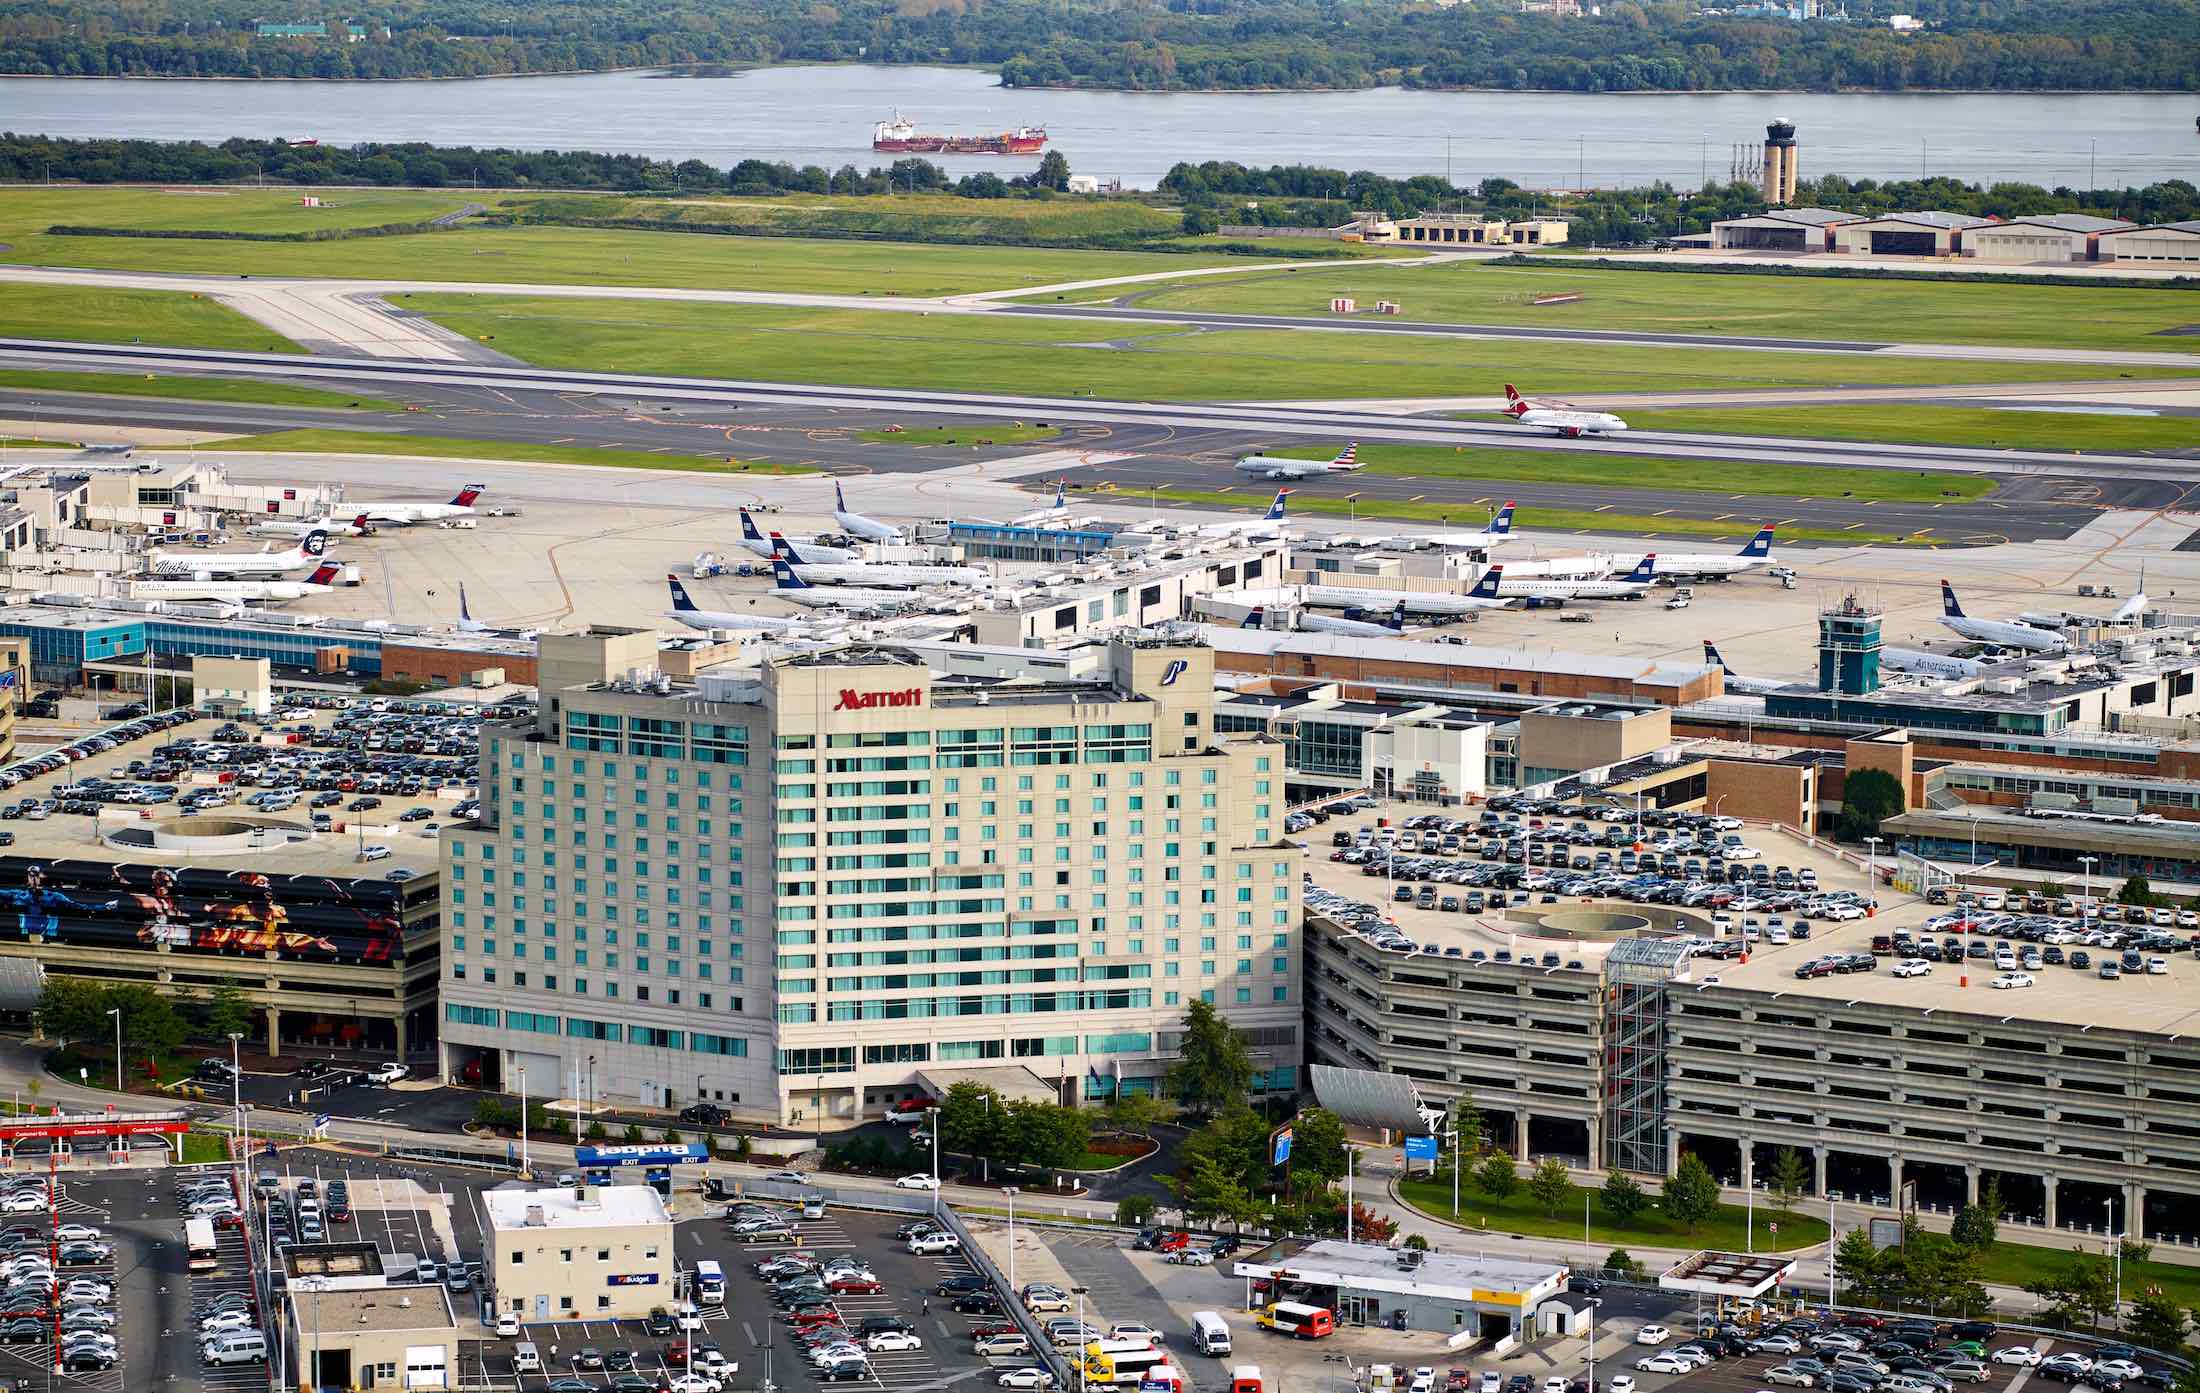 an aerial view of a airport with many airplanes and parking lots